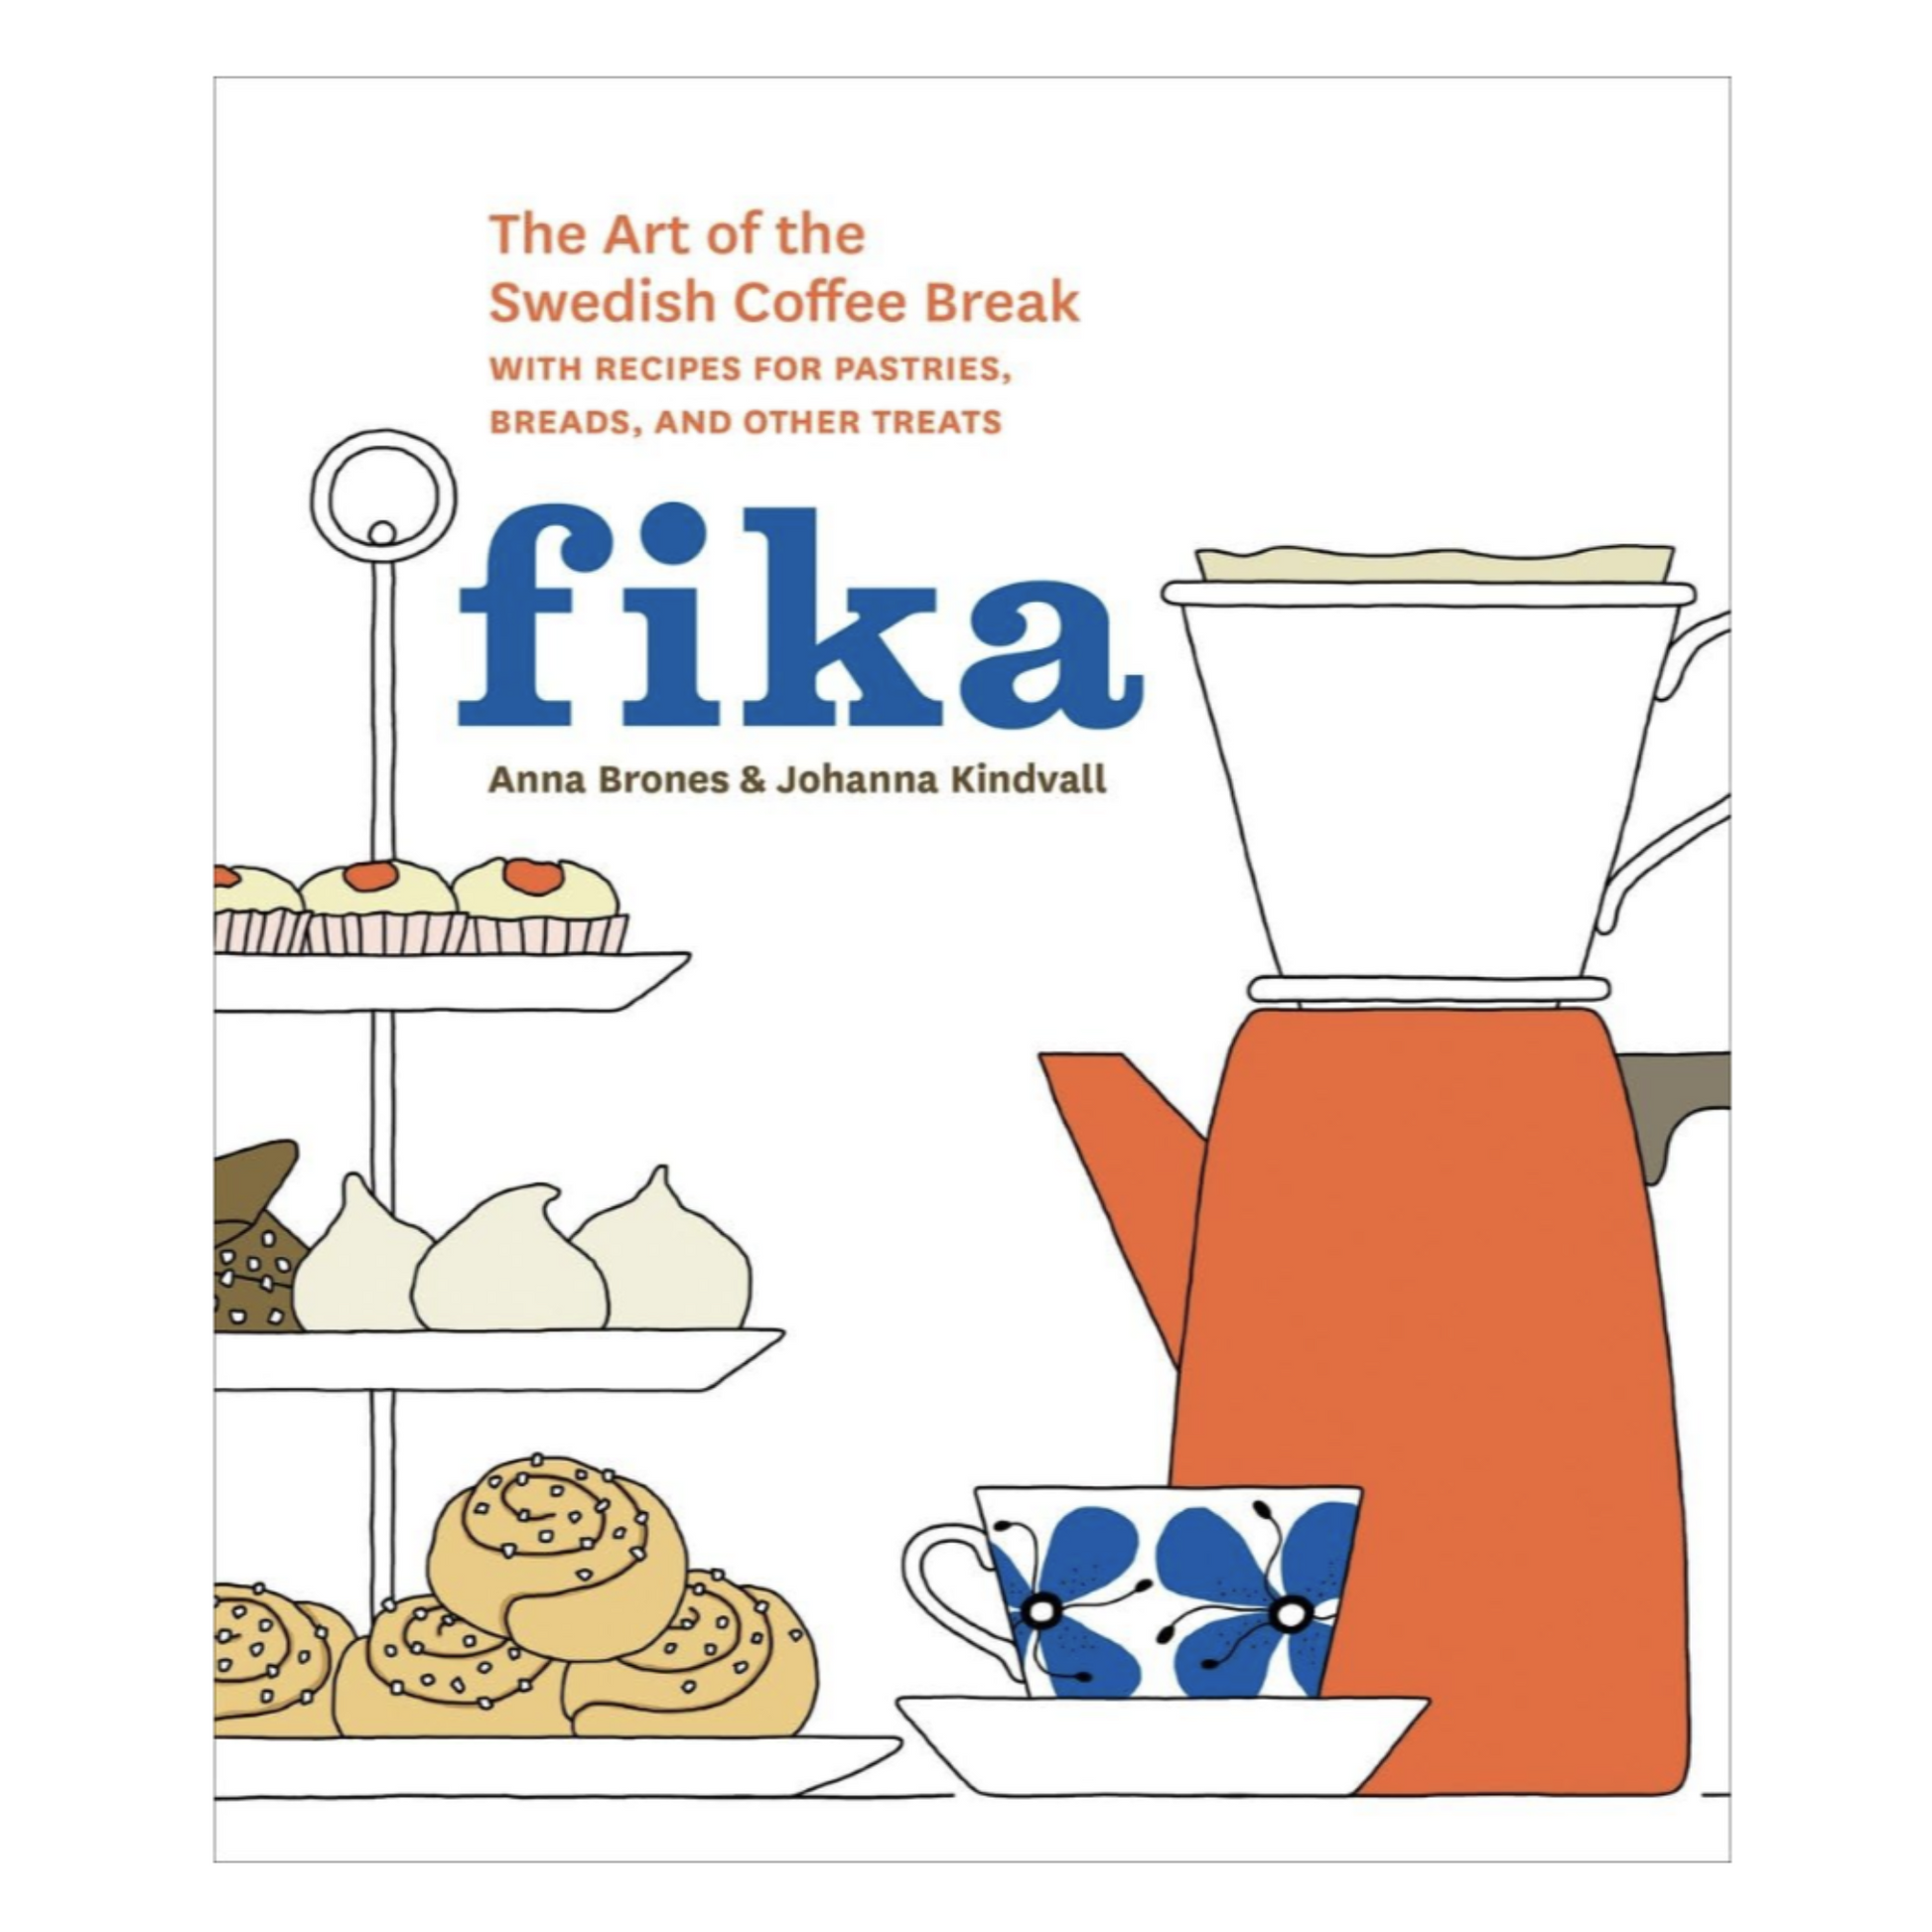 Fika: The Art of The Swedish Coffee Break, with Recipes for Pastries, Breads and Other Treats (8868049944863)